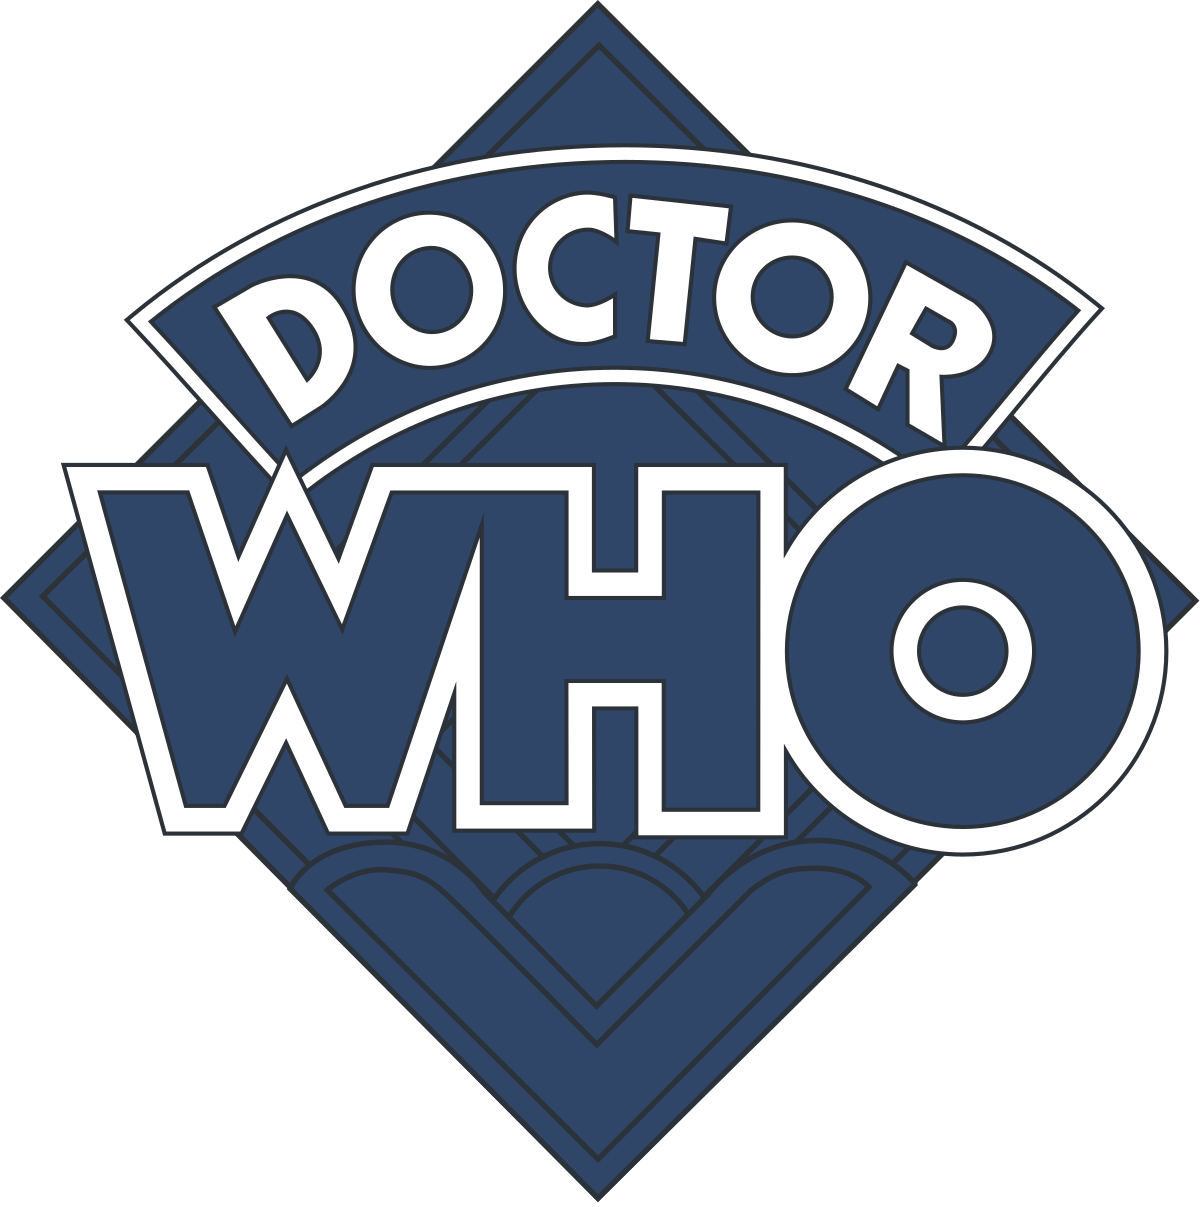 Download File:Doctor Who Logo 1973-1980.svg - Wikimedia Commons